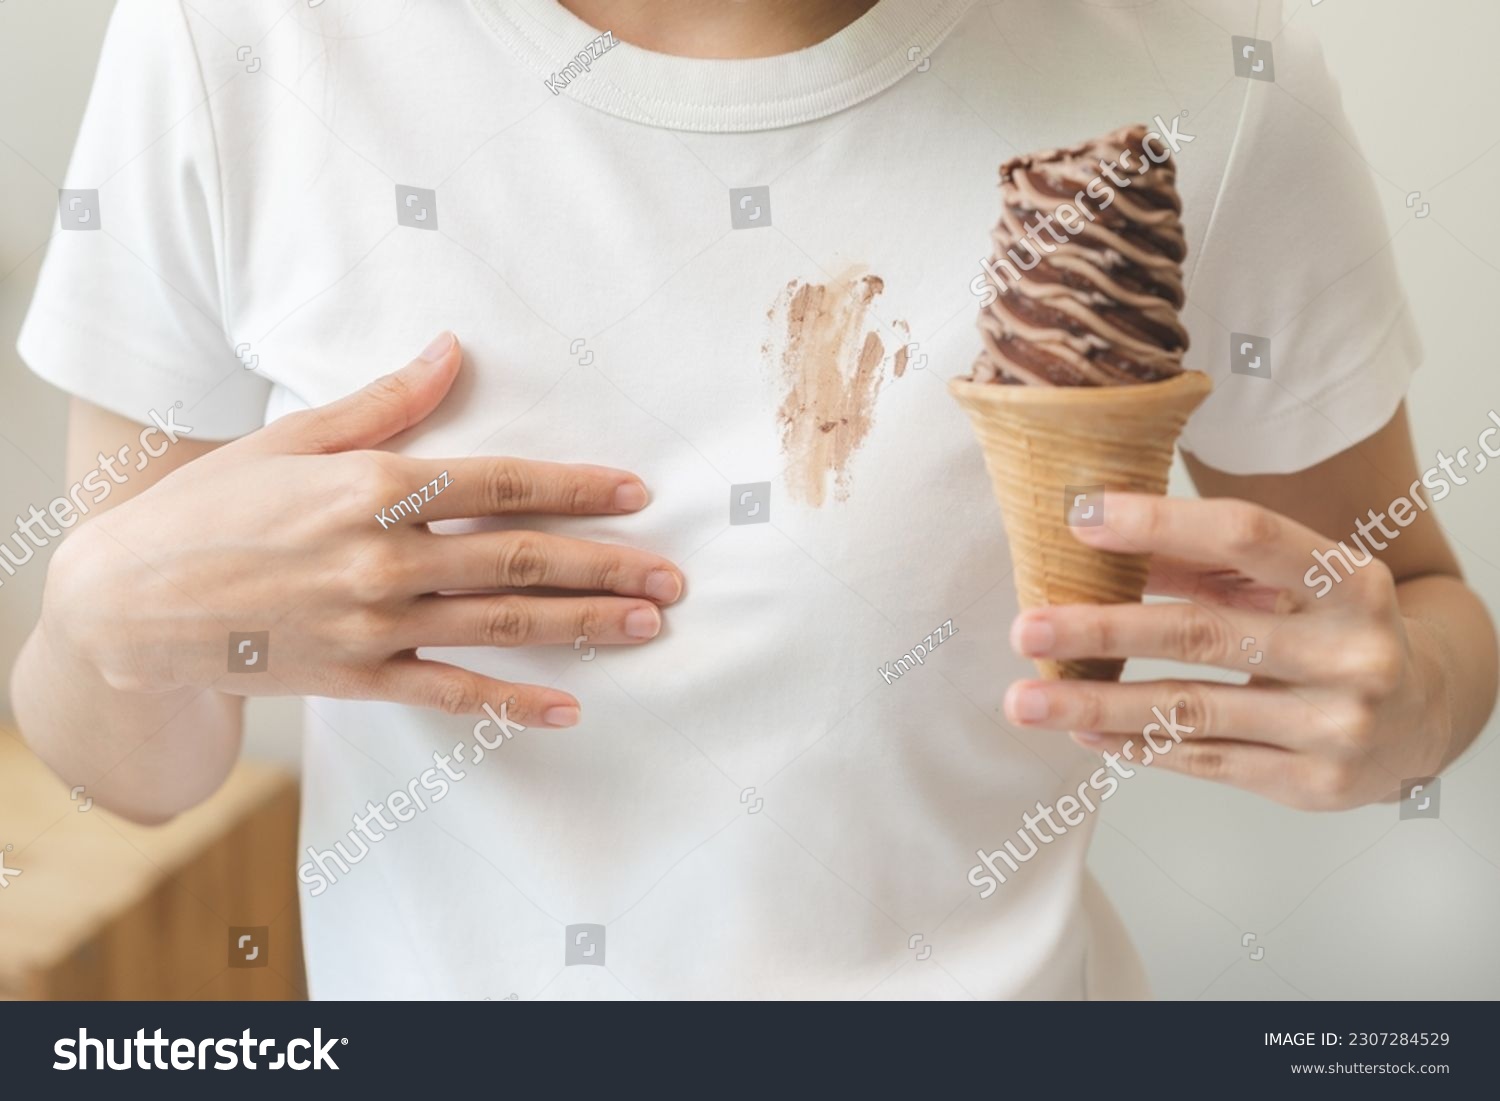 Cloth stain, disappointment asian young woman, girl eating melting ice cream in waffle cone on hot weather, hand show making chocolate cream drop on white t-shirt, spot dirty or smudge on clothes. #2307284529